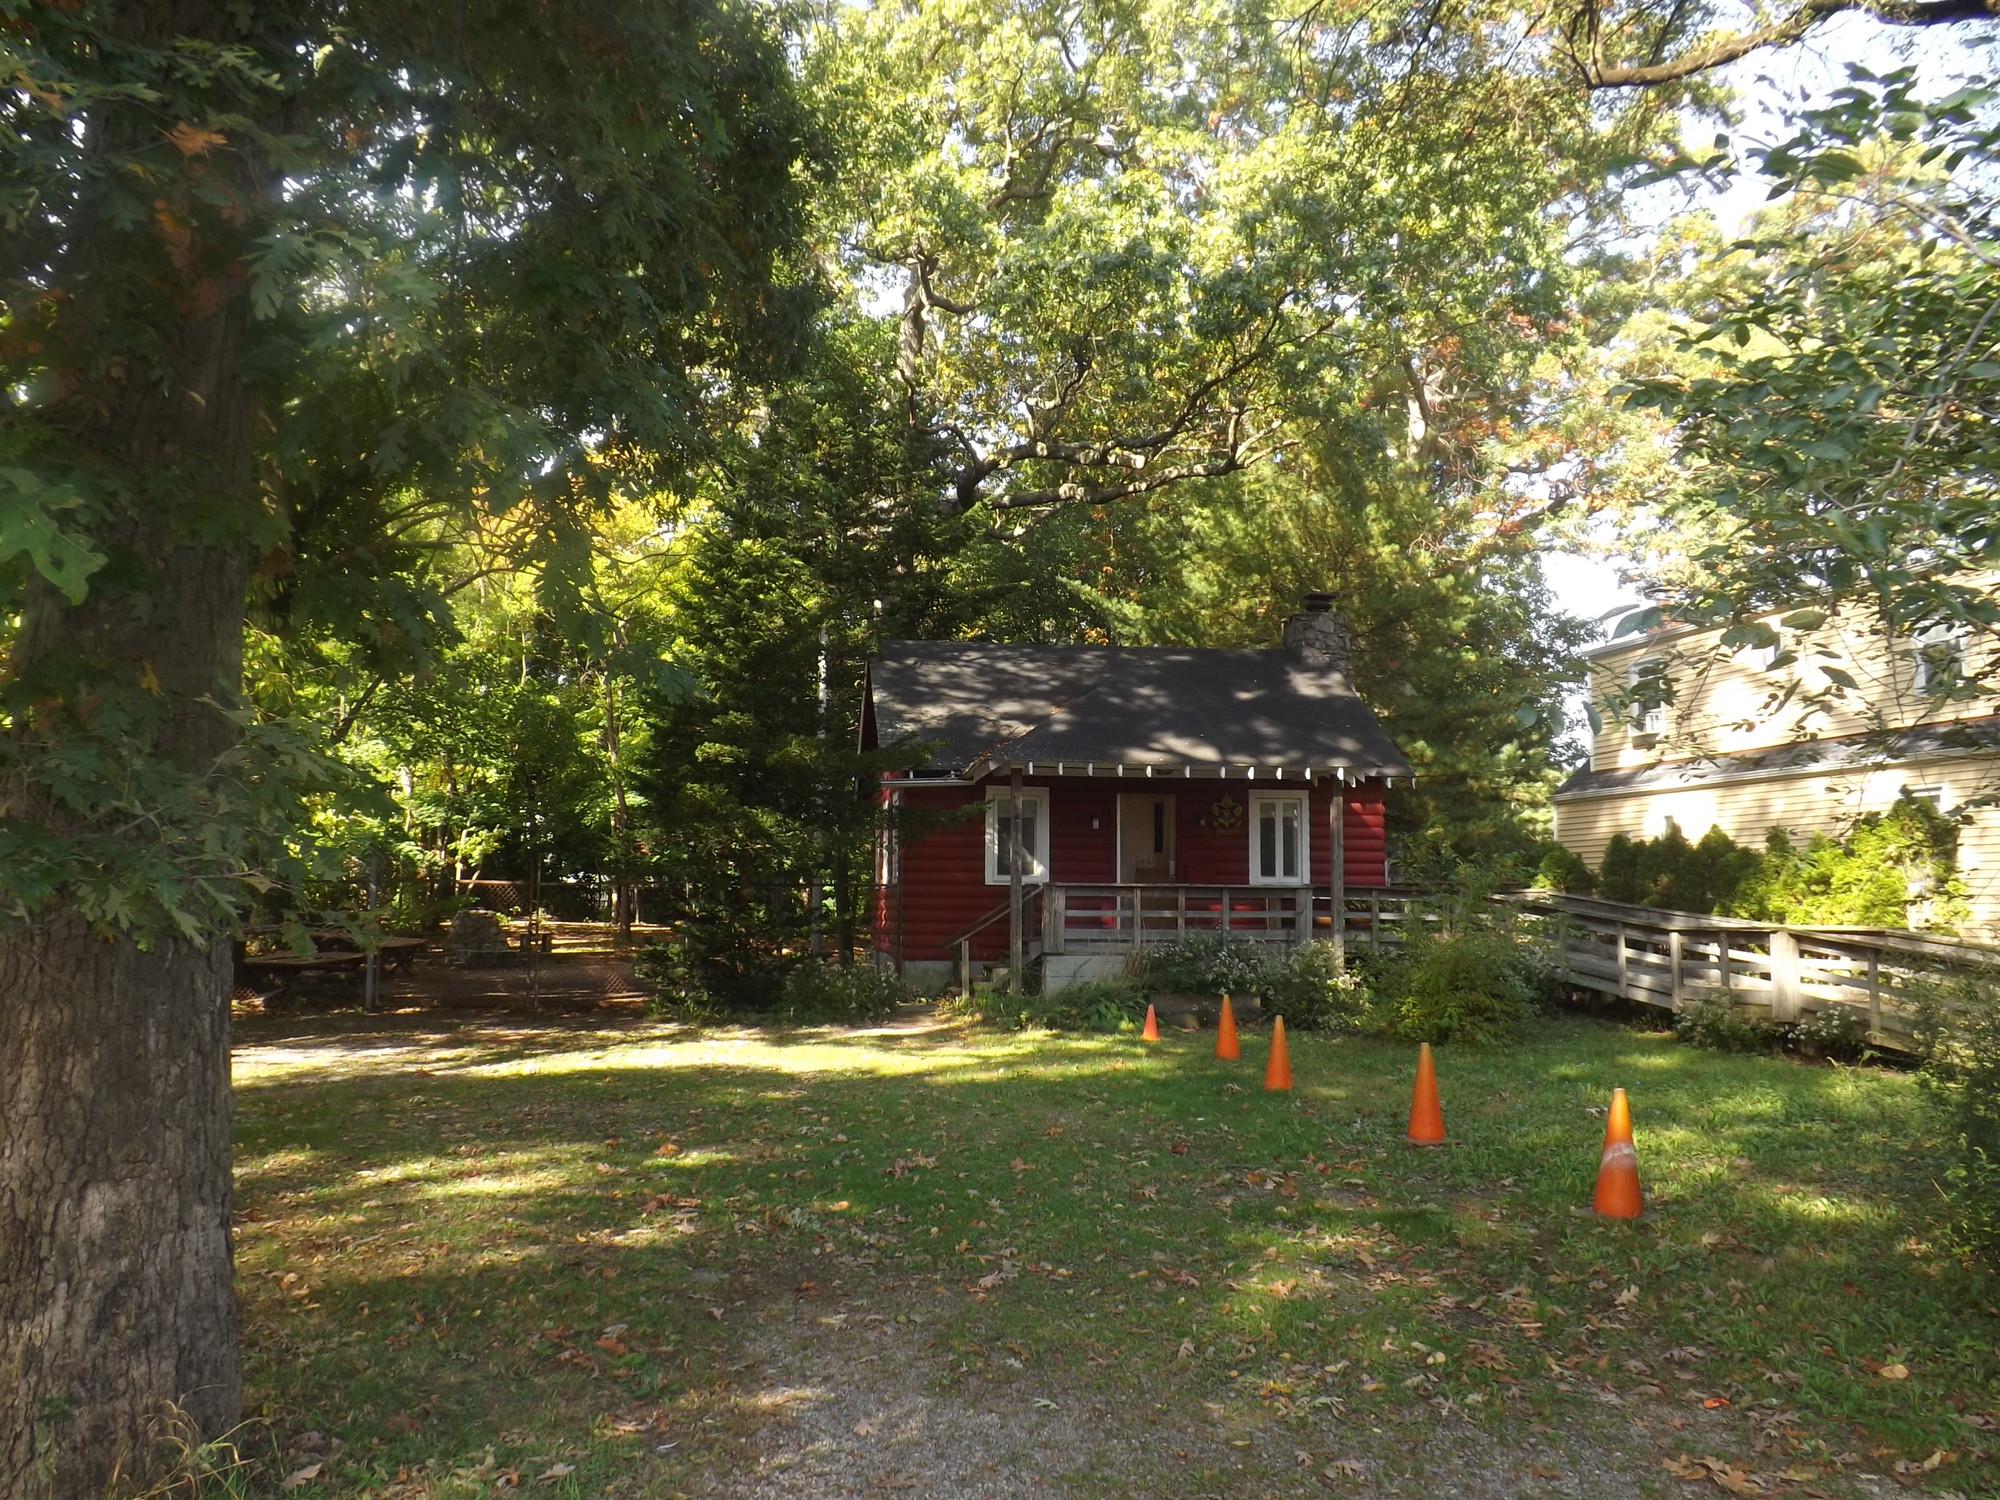 The Tom Sheppard cabin, on Grove Street, opened in 1938, and has remained in the Baldwin Boys Association’s possession ever since.